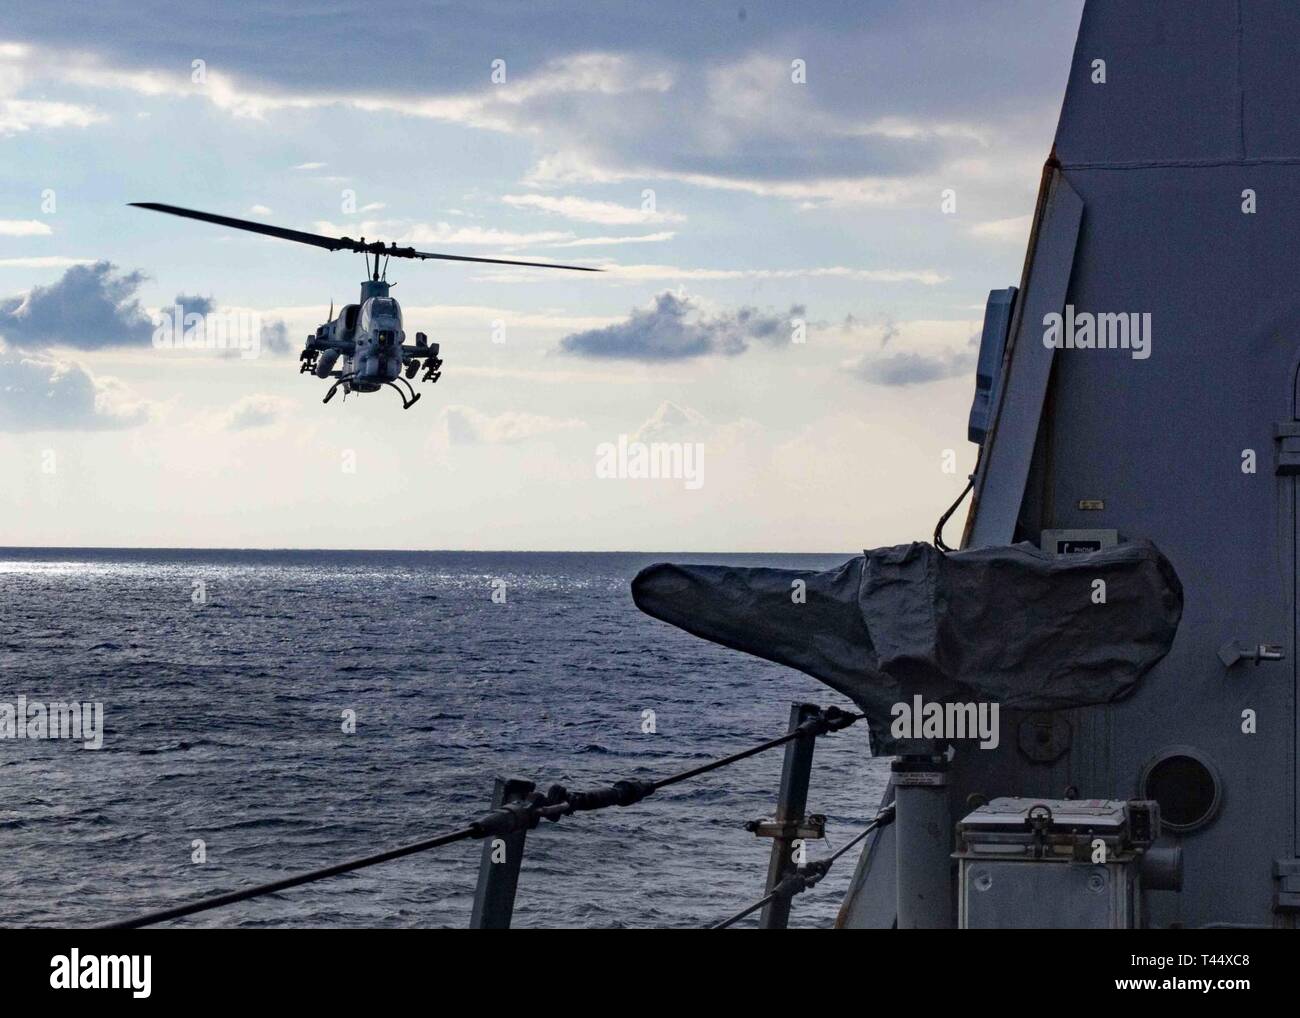 MEDITERRANEAN SEA (Feb. 21, 2019) An AH-1W Super Cobra helicopter assigned to the “Black Knights” of Marine Medium Tiltrotor Squadron (VMM) 264 (Reinforced) flies by the San Antonio-class amphibious transport dock ship USS Arlington (LPD 24), Feb. 21, 2019. Arlington is on a scheduled deployment as part of the Kearsarge Amphibious Ready Group in support of maritime security operations, crisis response and theater security cooperation, while also providing a forward naval presence. Stock Photo